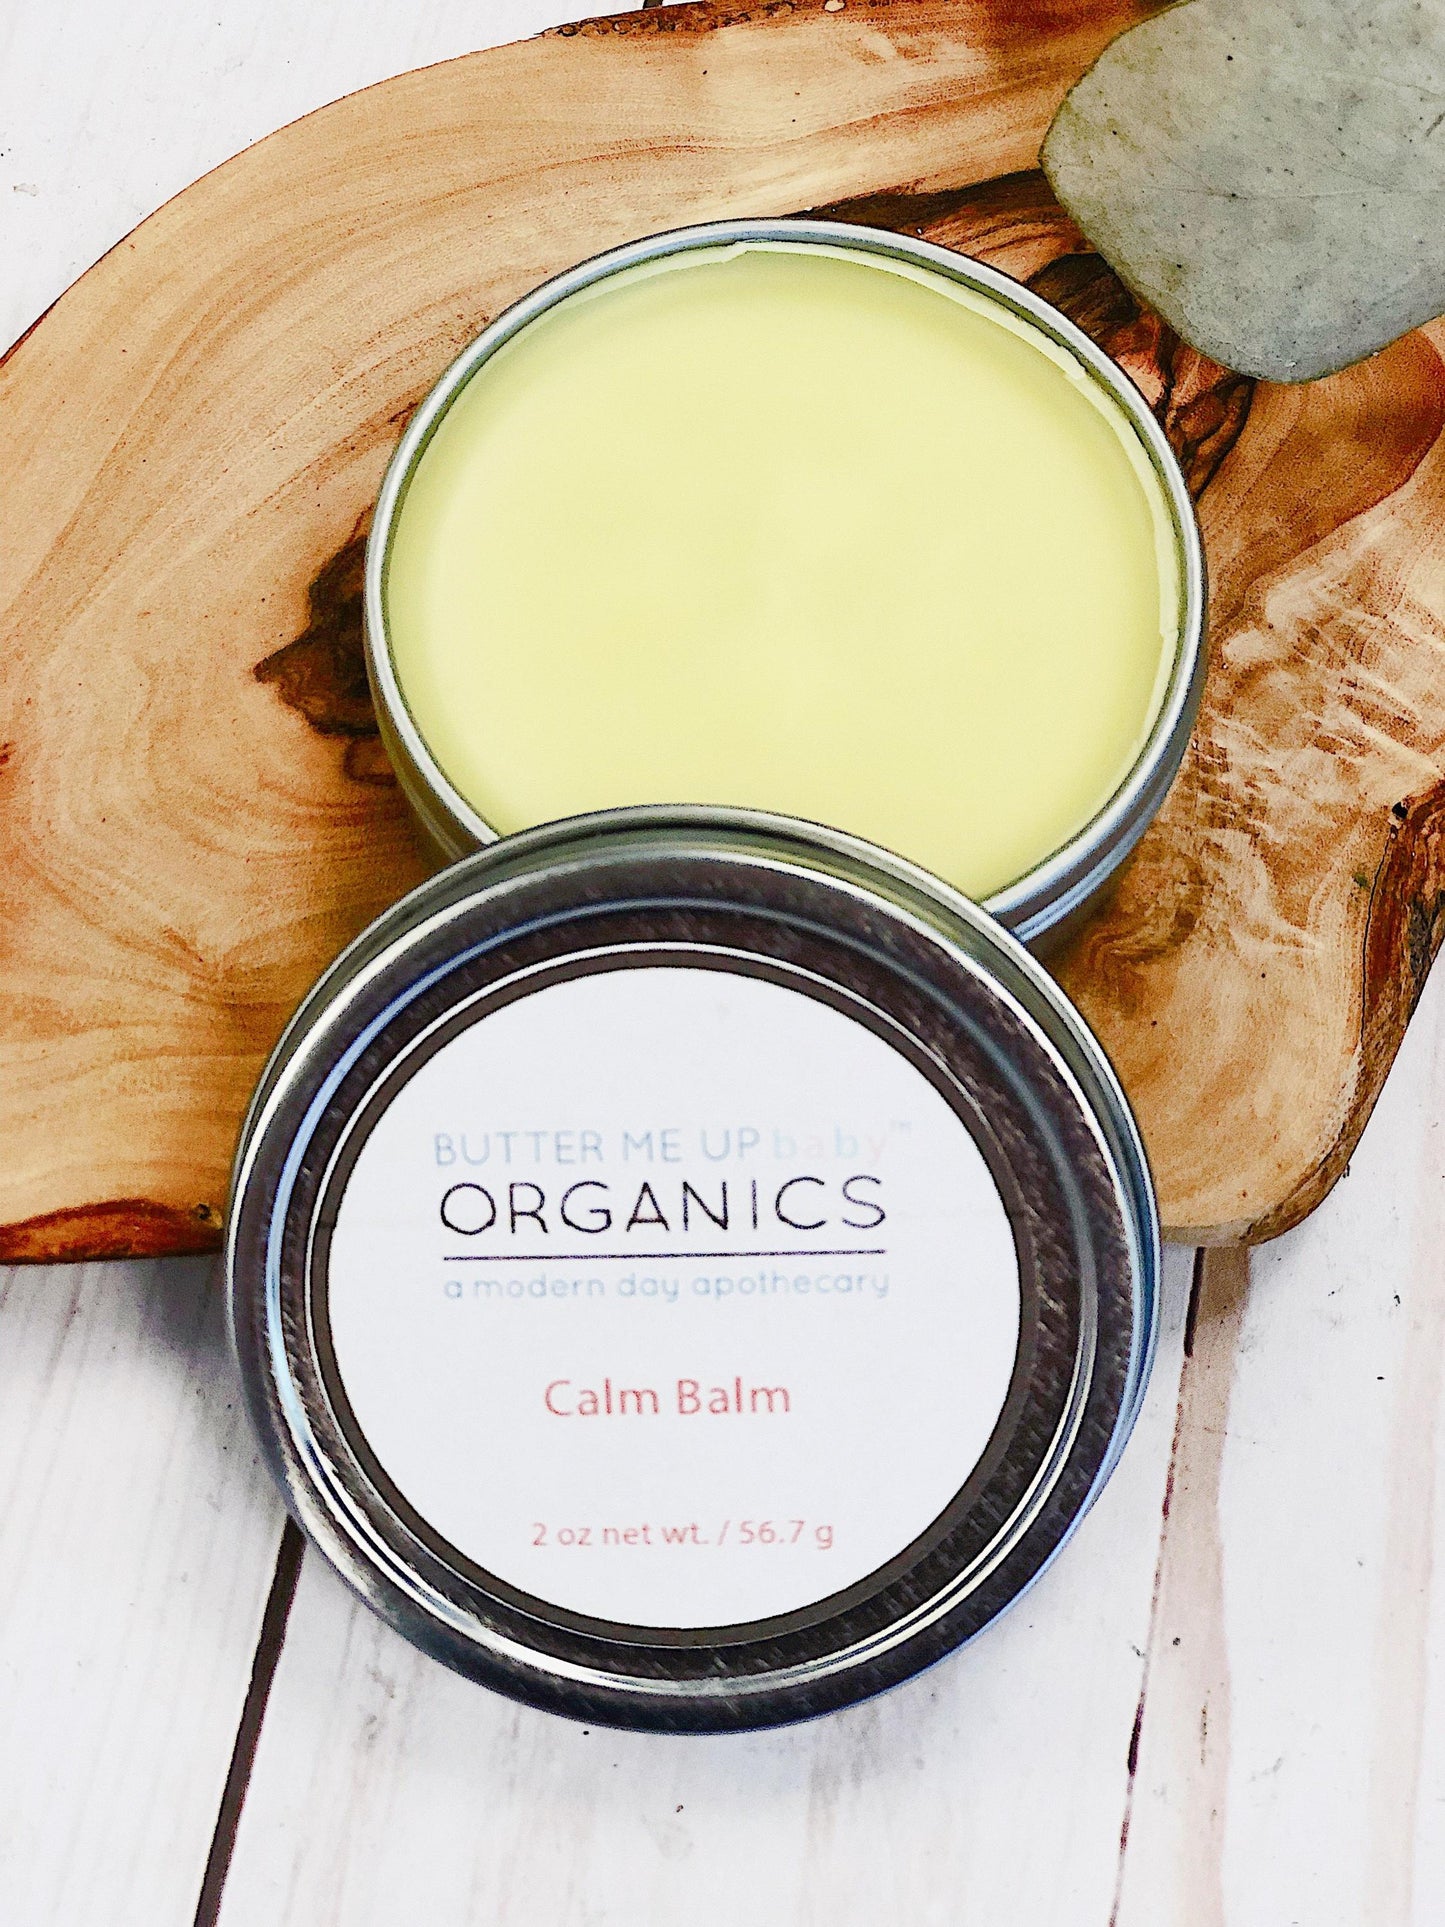 BUTTER ME UP ORGANICS Calm Balm / Aromatherapy for Babies, Children and Adults